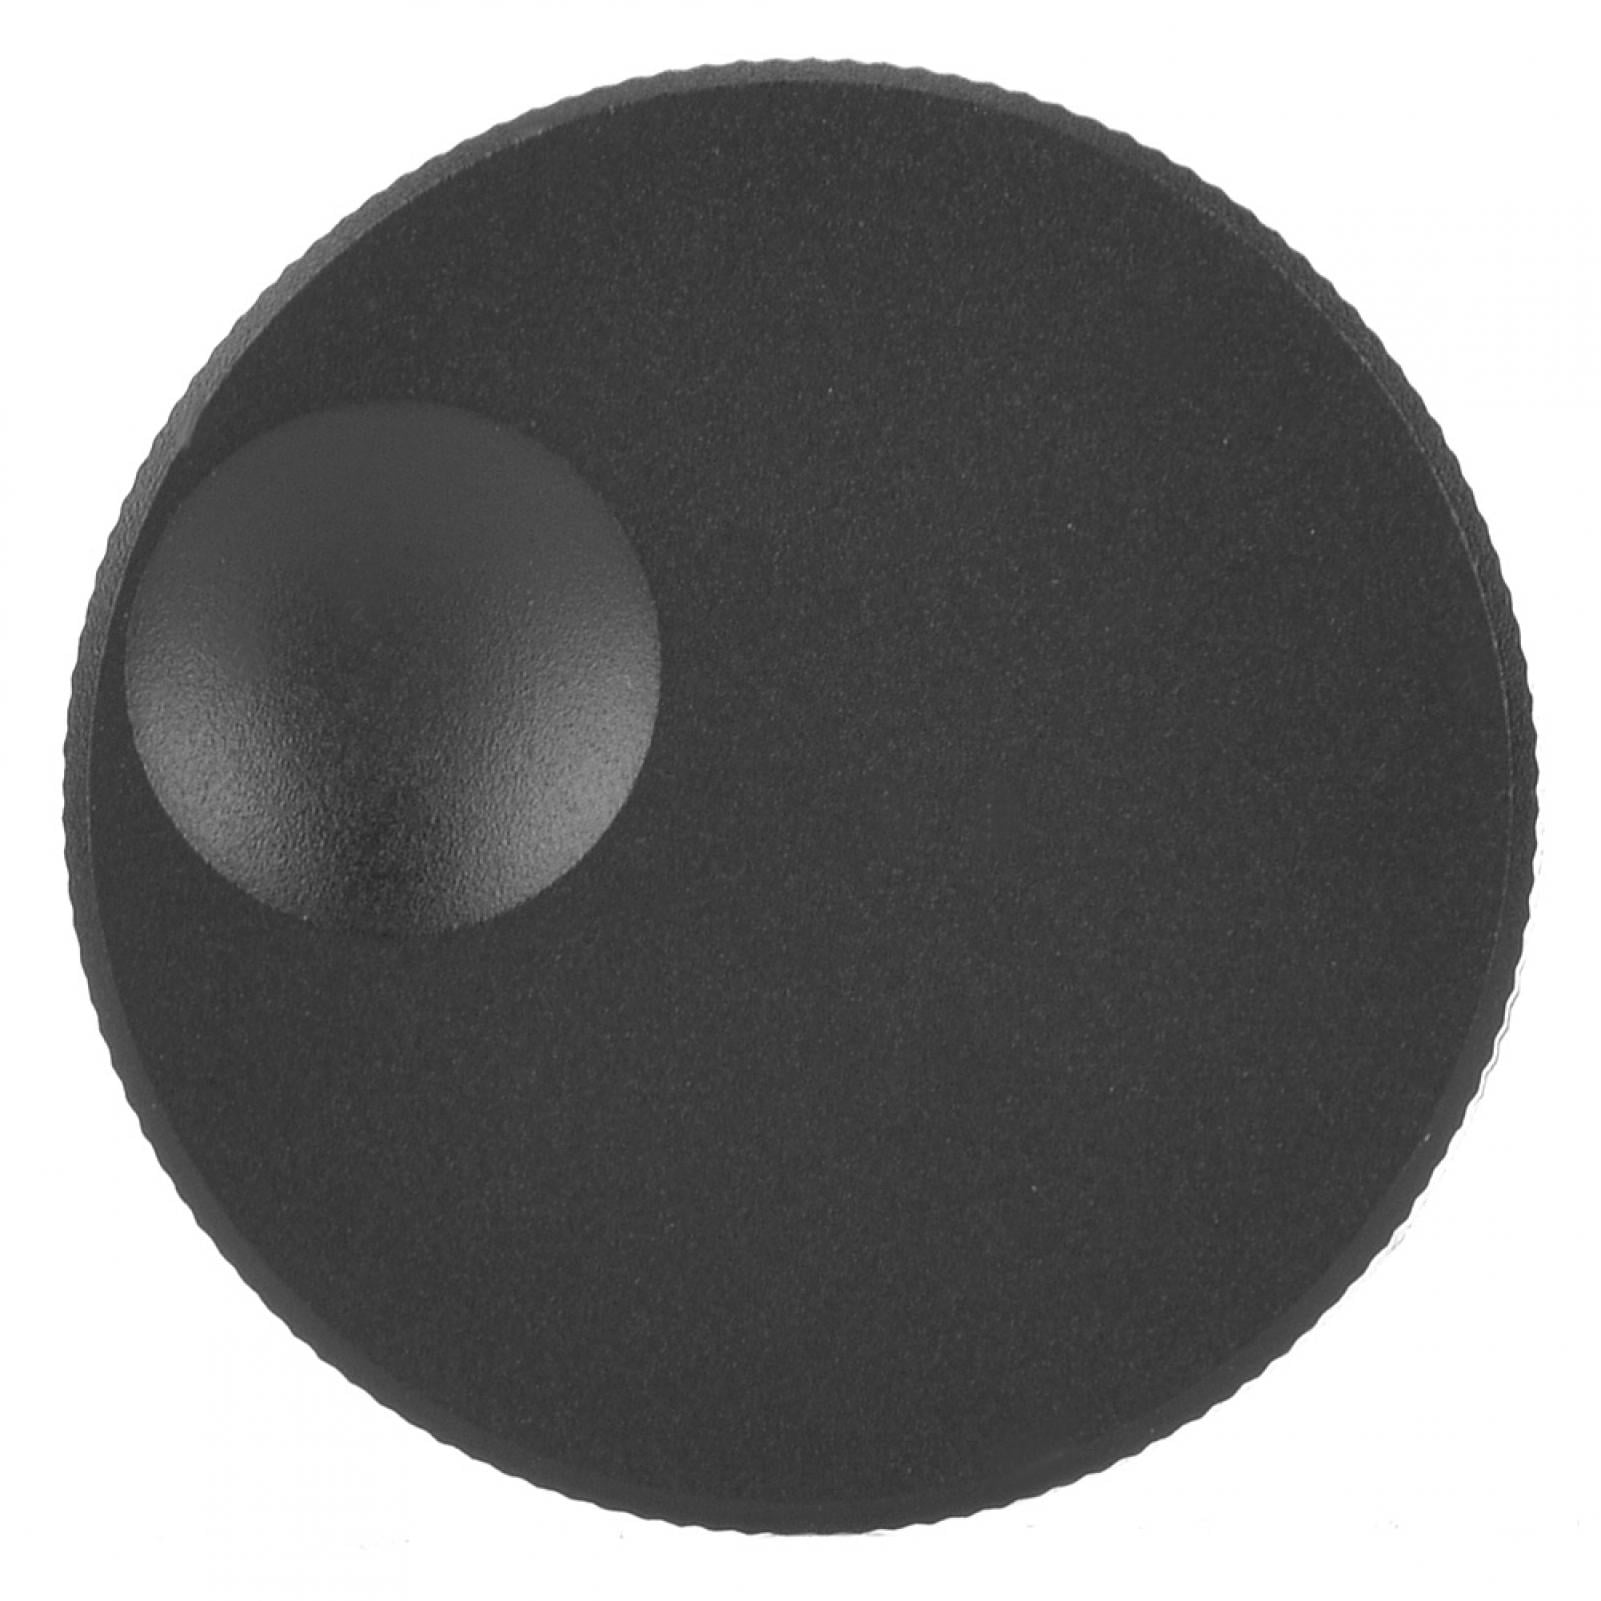 32x13mm Volume Control Black Frosted Solid Aluminum Knob for 6mm Potentiometer 